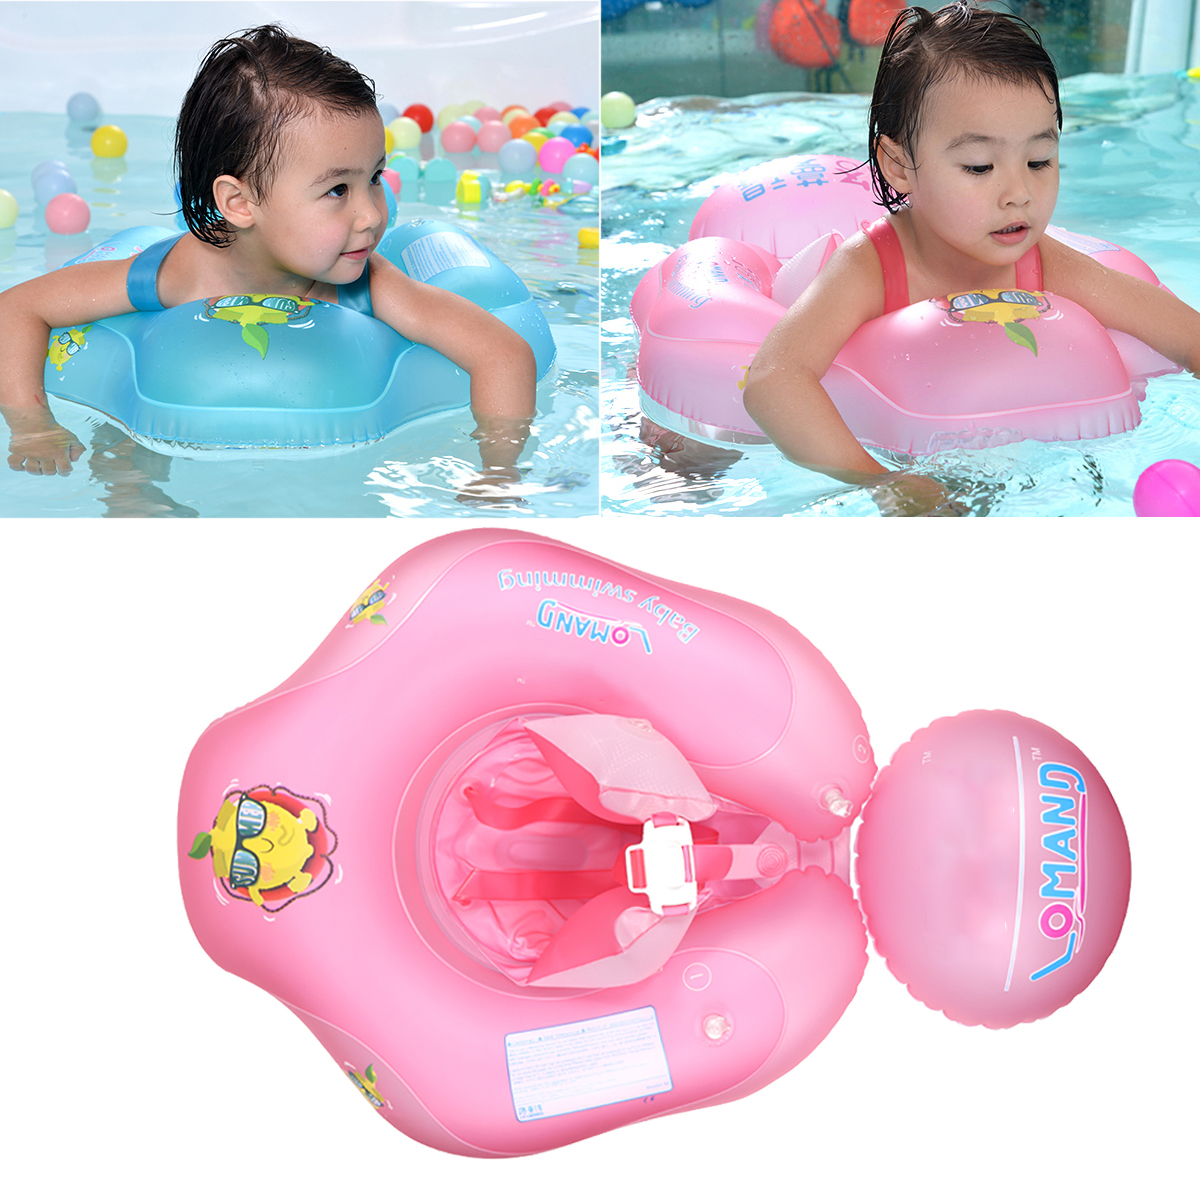 PVC-Inflatable-Swimming-Ring-Baby-Summer-Water-Play-Floats-Toys-Swimming-Pool-Accessories-1697635-1